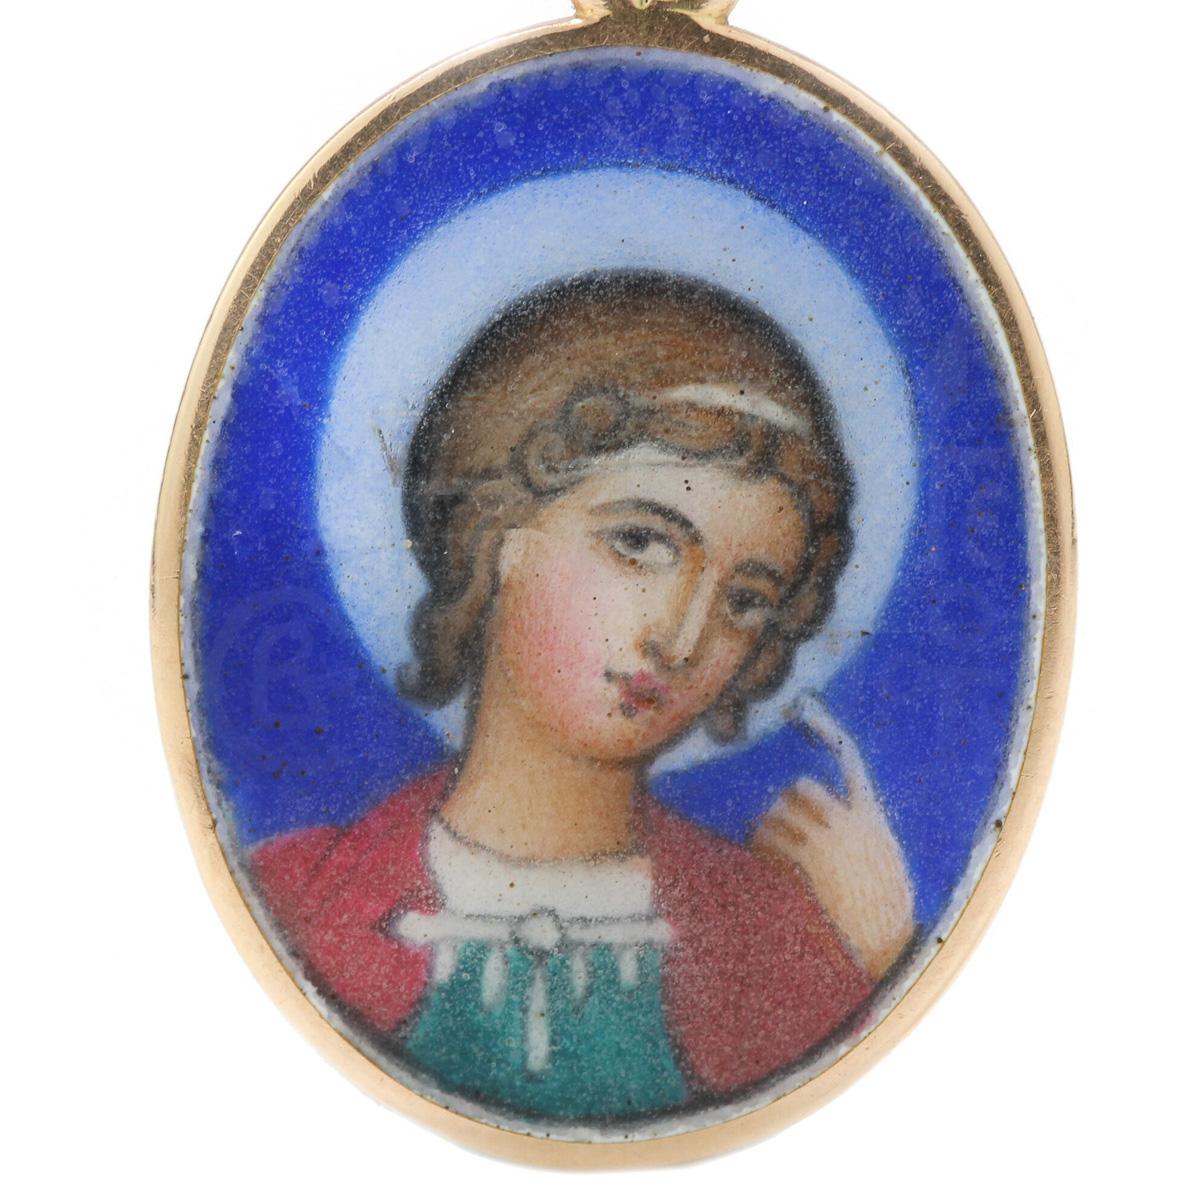 Antique early-20th century Imperial Russian Fabergé hand painted enamel on gold pendant of St. George. One of the Fourteen Holy Helpers and one of the most prominent military saints, he is immortalized in the legend of Saint George and the Dragon.